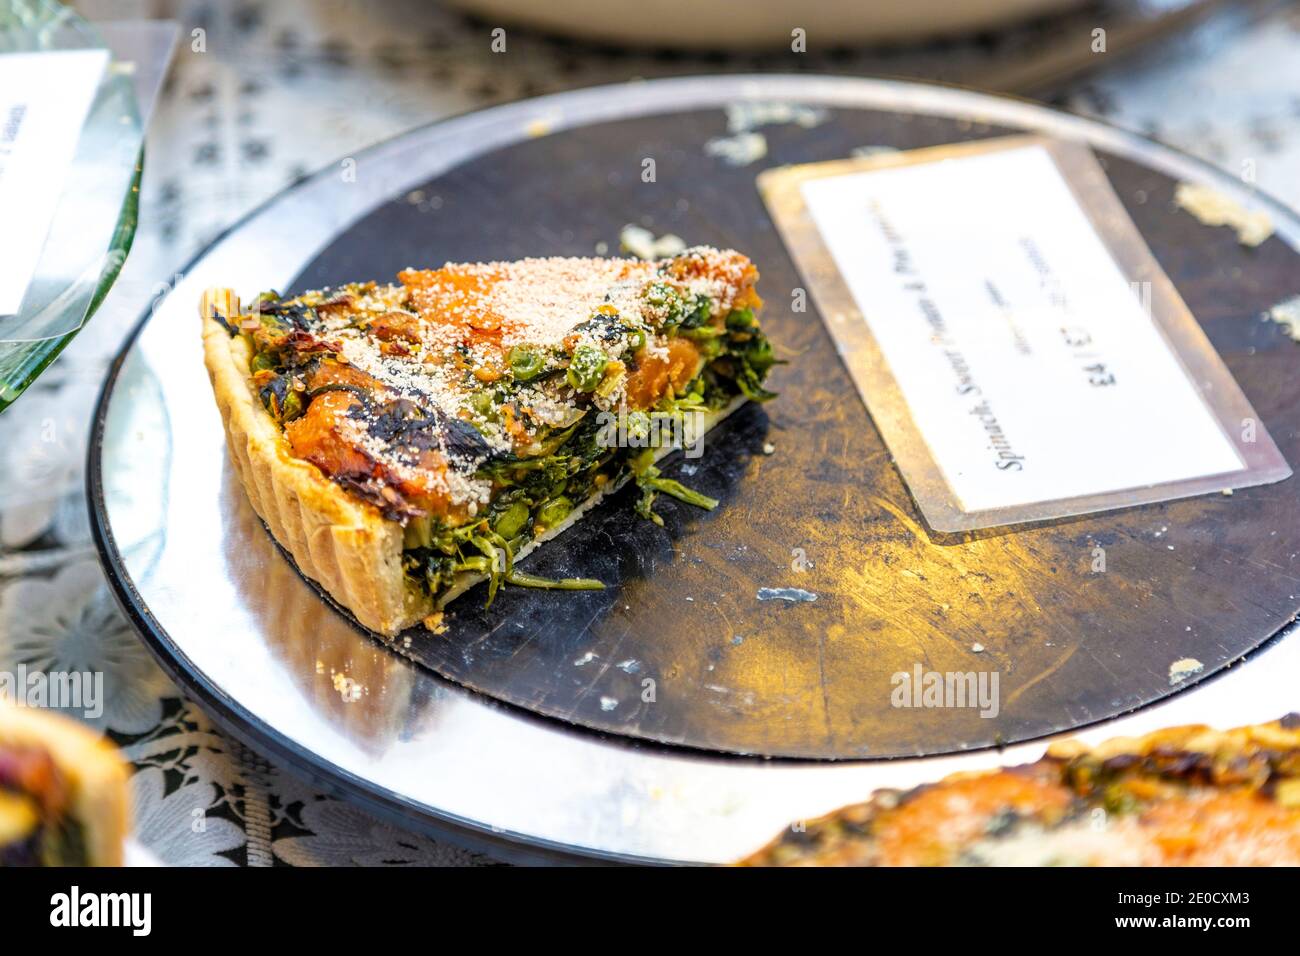 Slice of spinach and sweet potato pie at Greenwich Market, London, UK Stock Photo